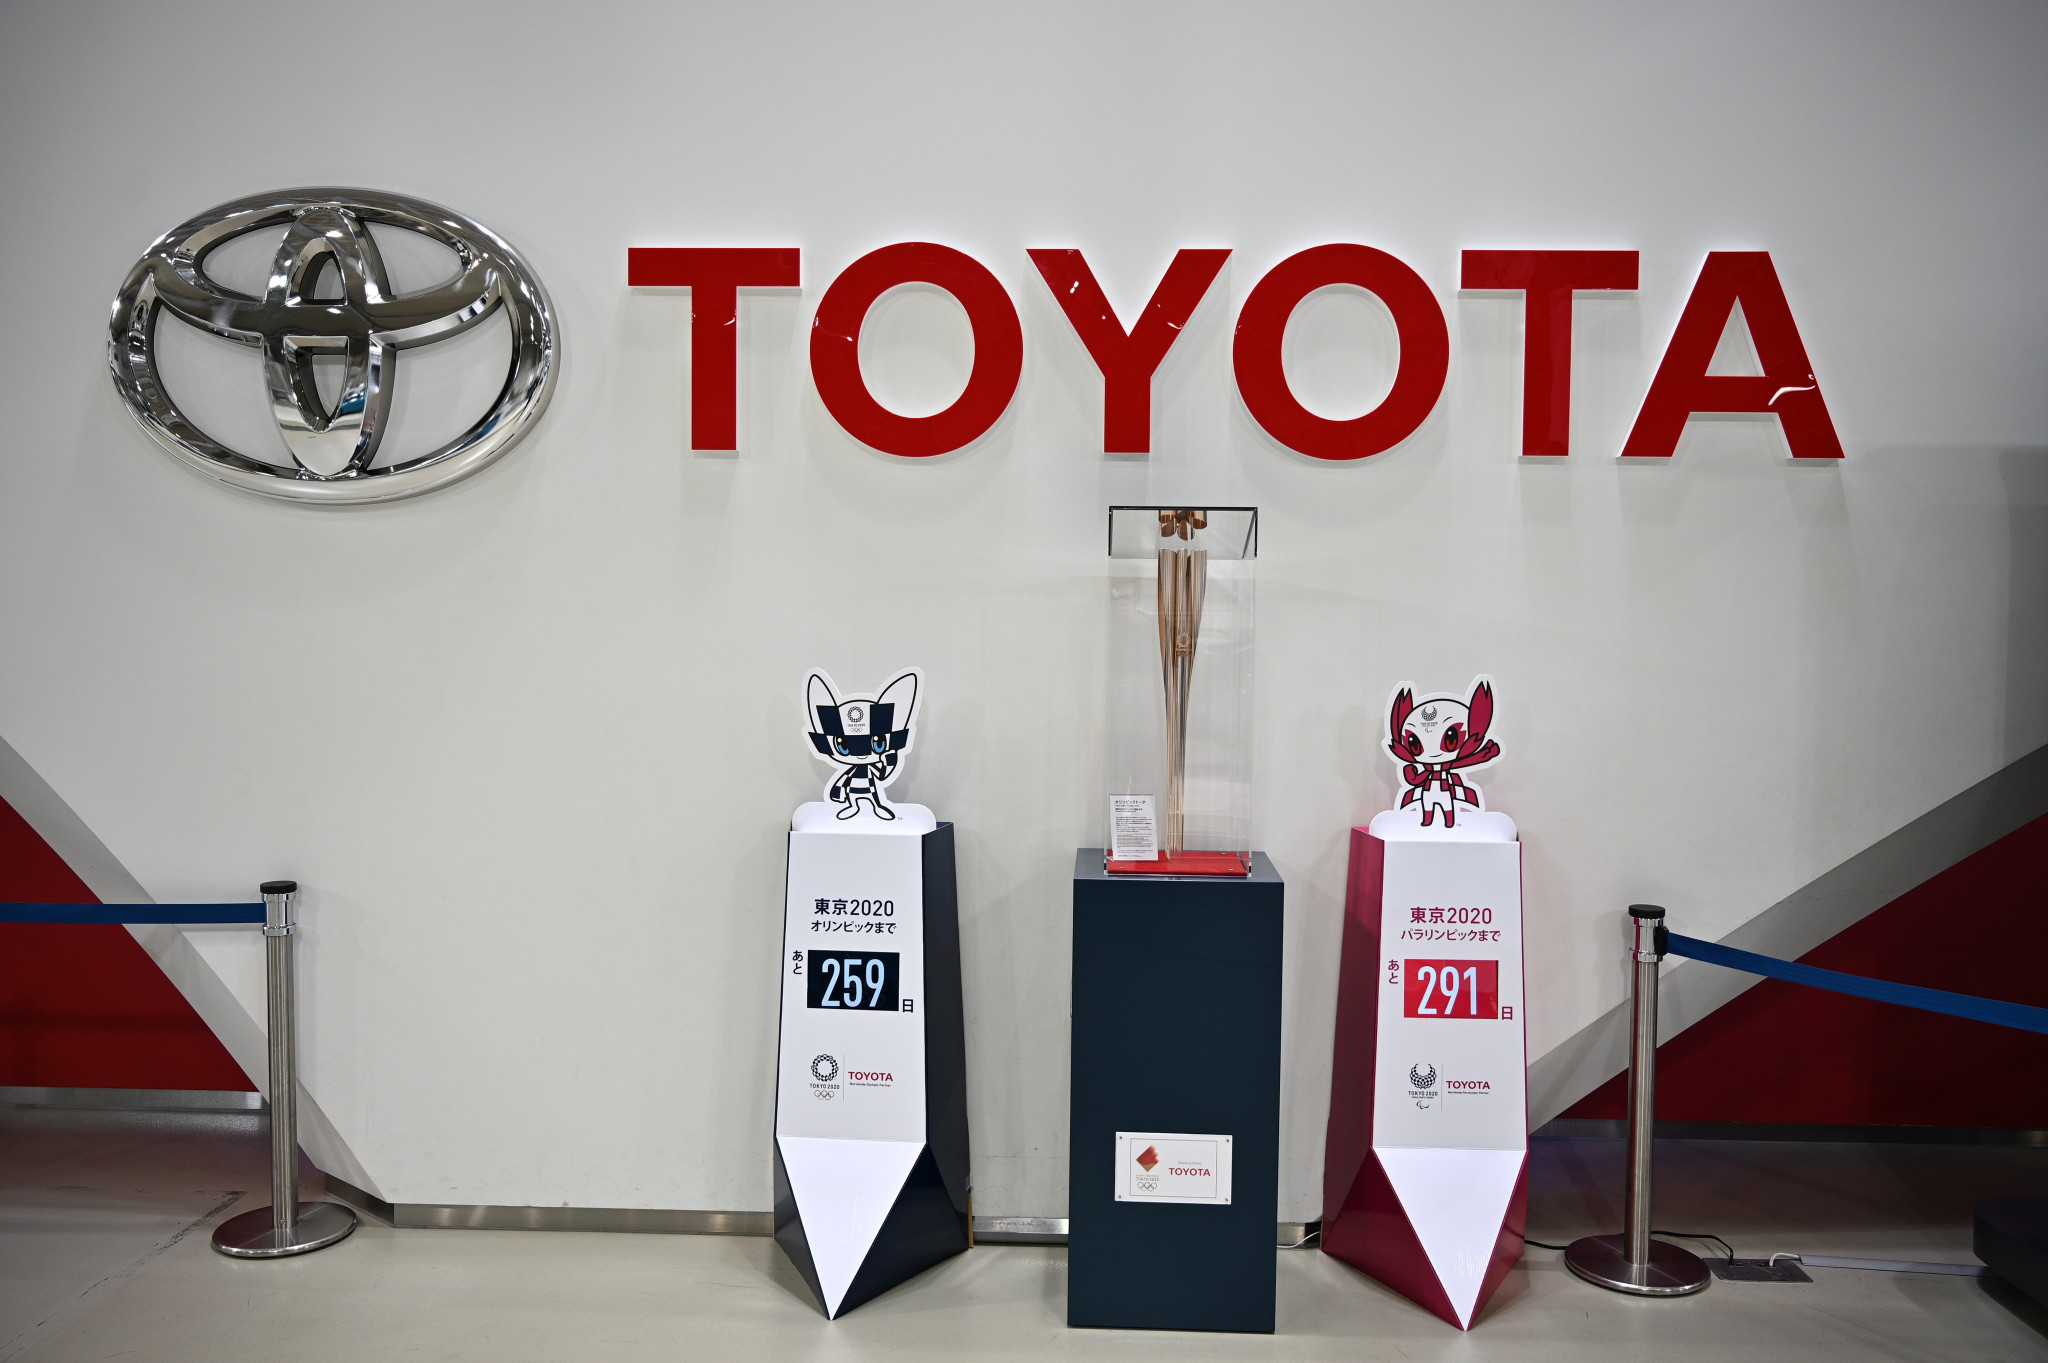 Toyota is among the supporters of the grant programme ©Getty Images